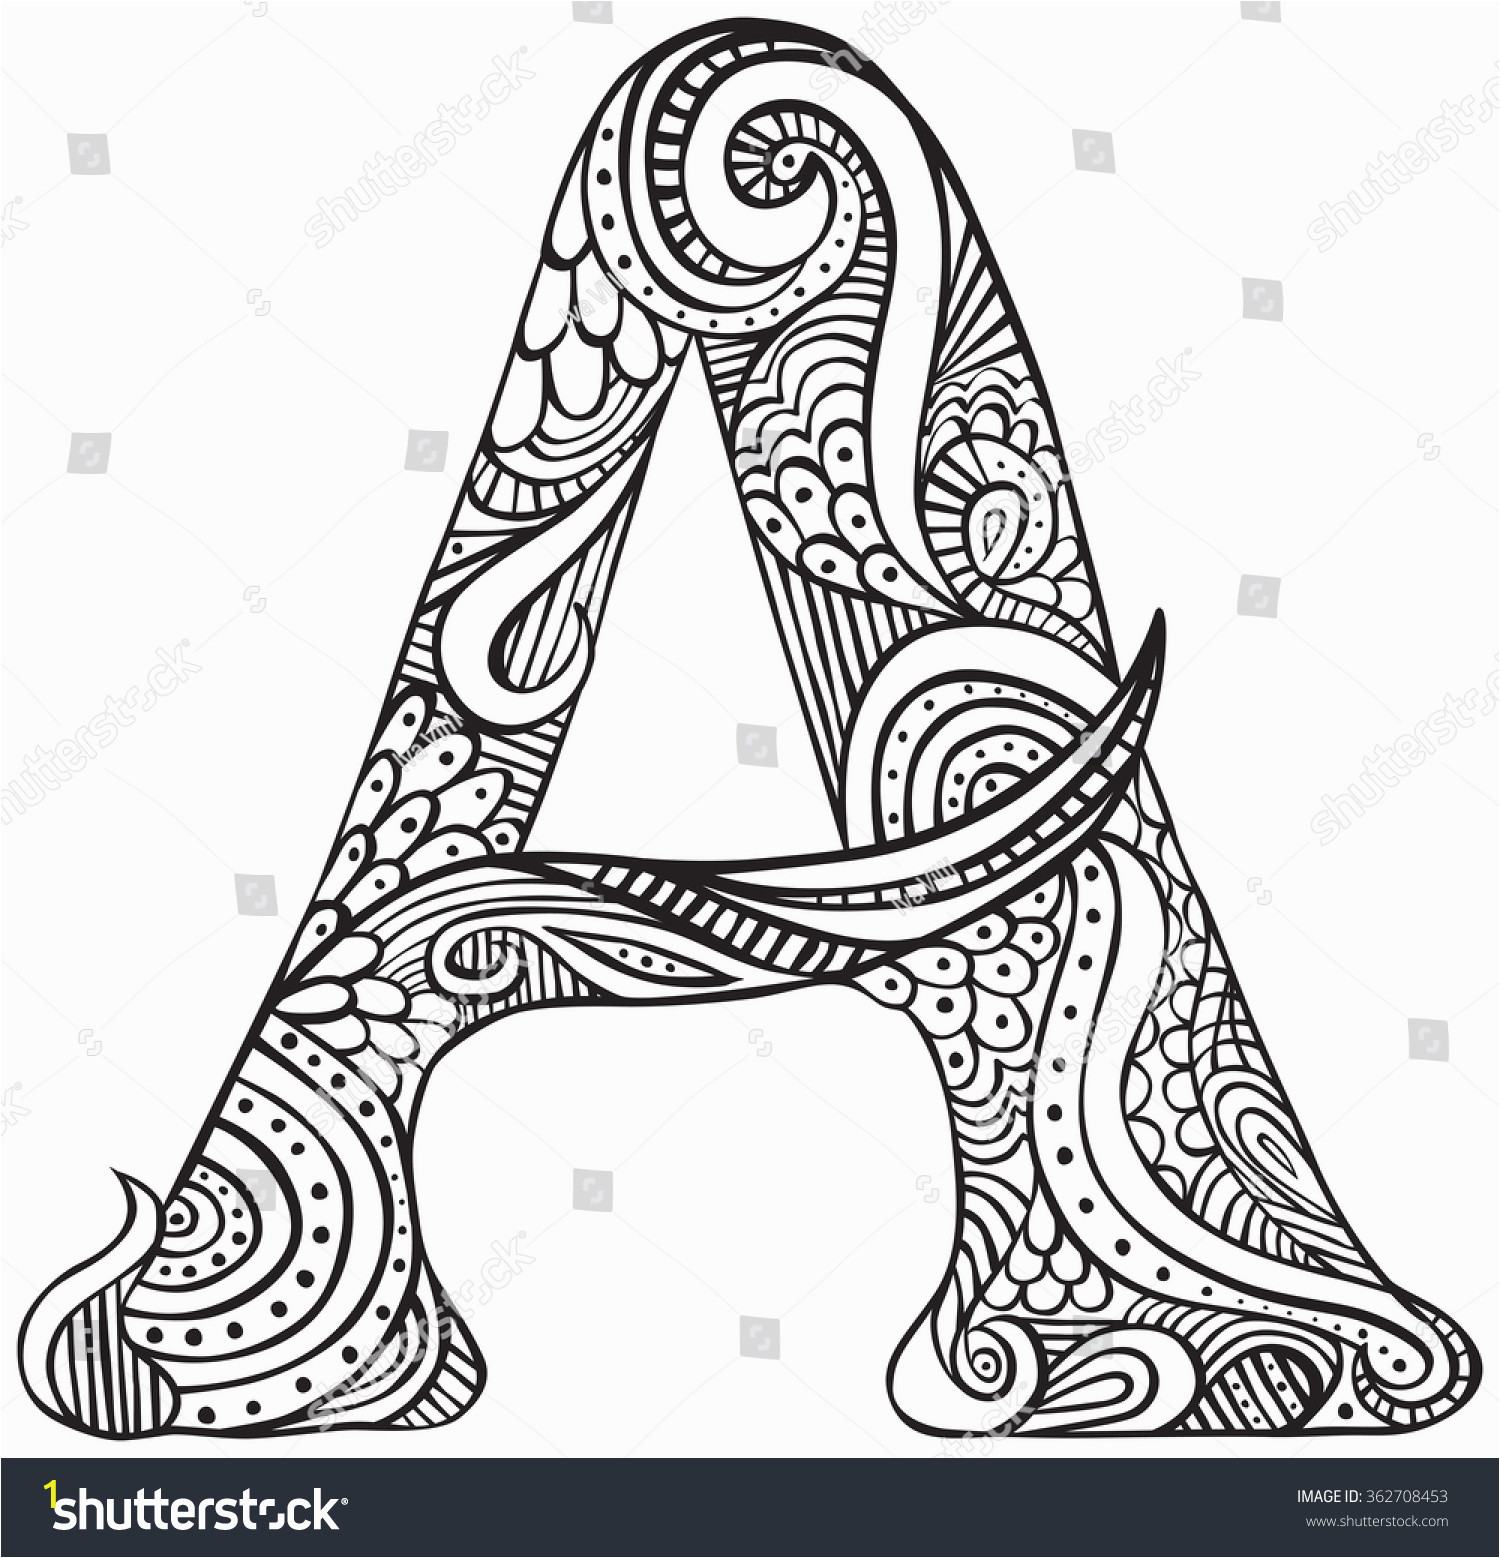 stock vector hand drawn capital letter a in black coloring sheet for adults